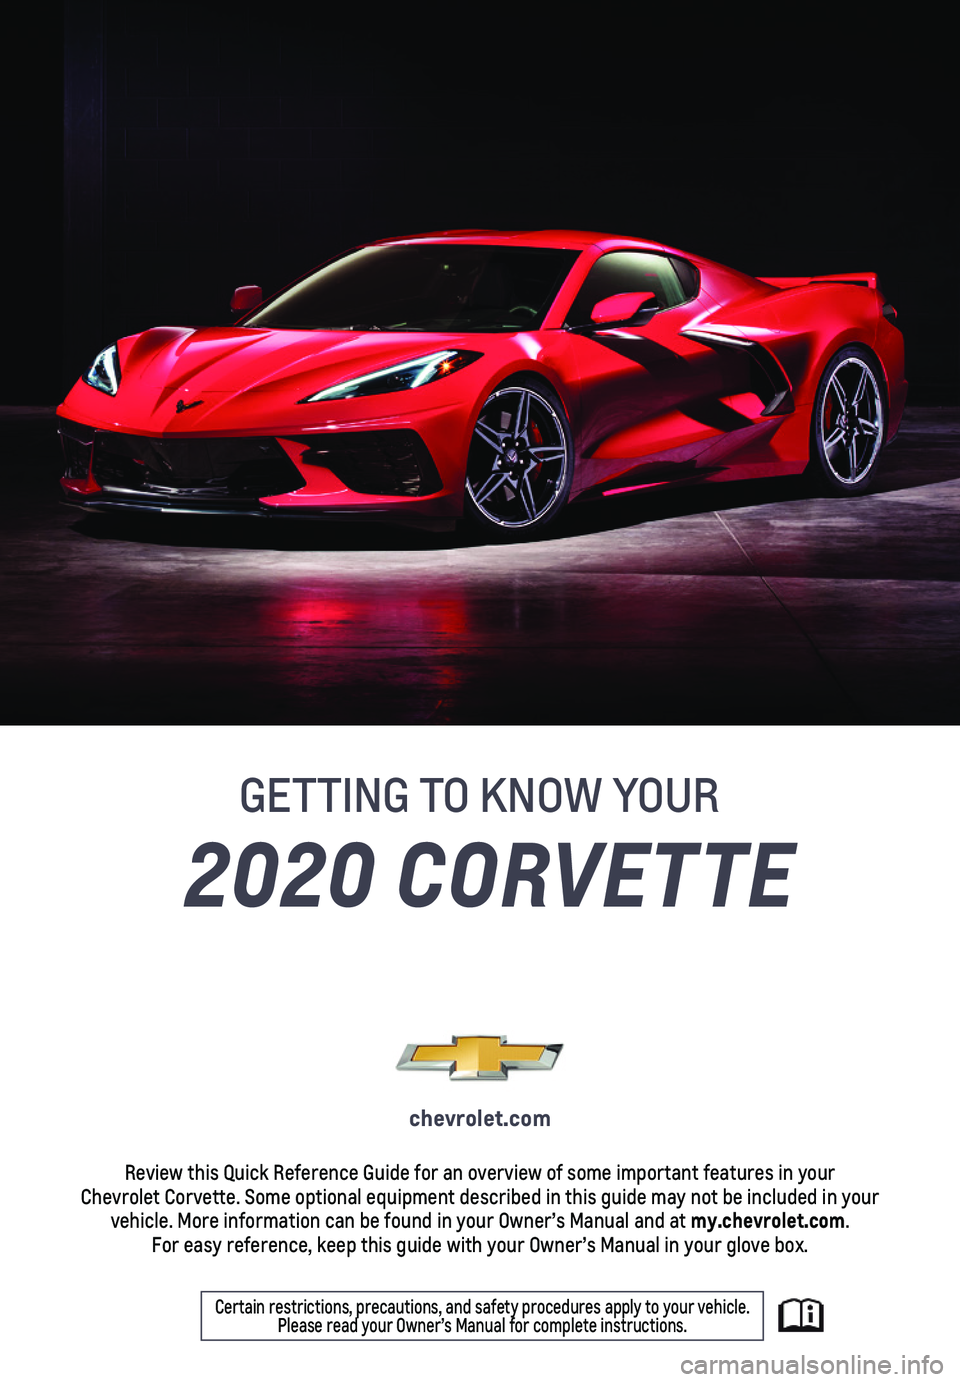 CHEVROLET CORVETTE 2020  Get To Know Guide 2020 CORVETTE
GETTING TO KNOW YOUR
chevrolet.com
Review this Quick Reference Guide for an overview of some important feat\
ures in your  Chevrolet Corvette. Some optional equipment described in this g